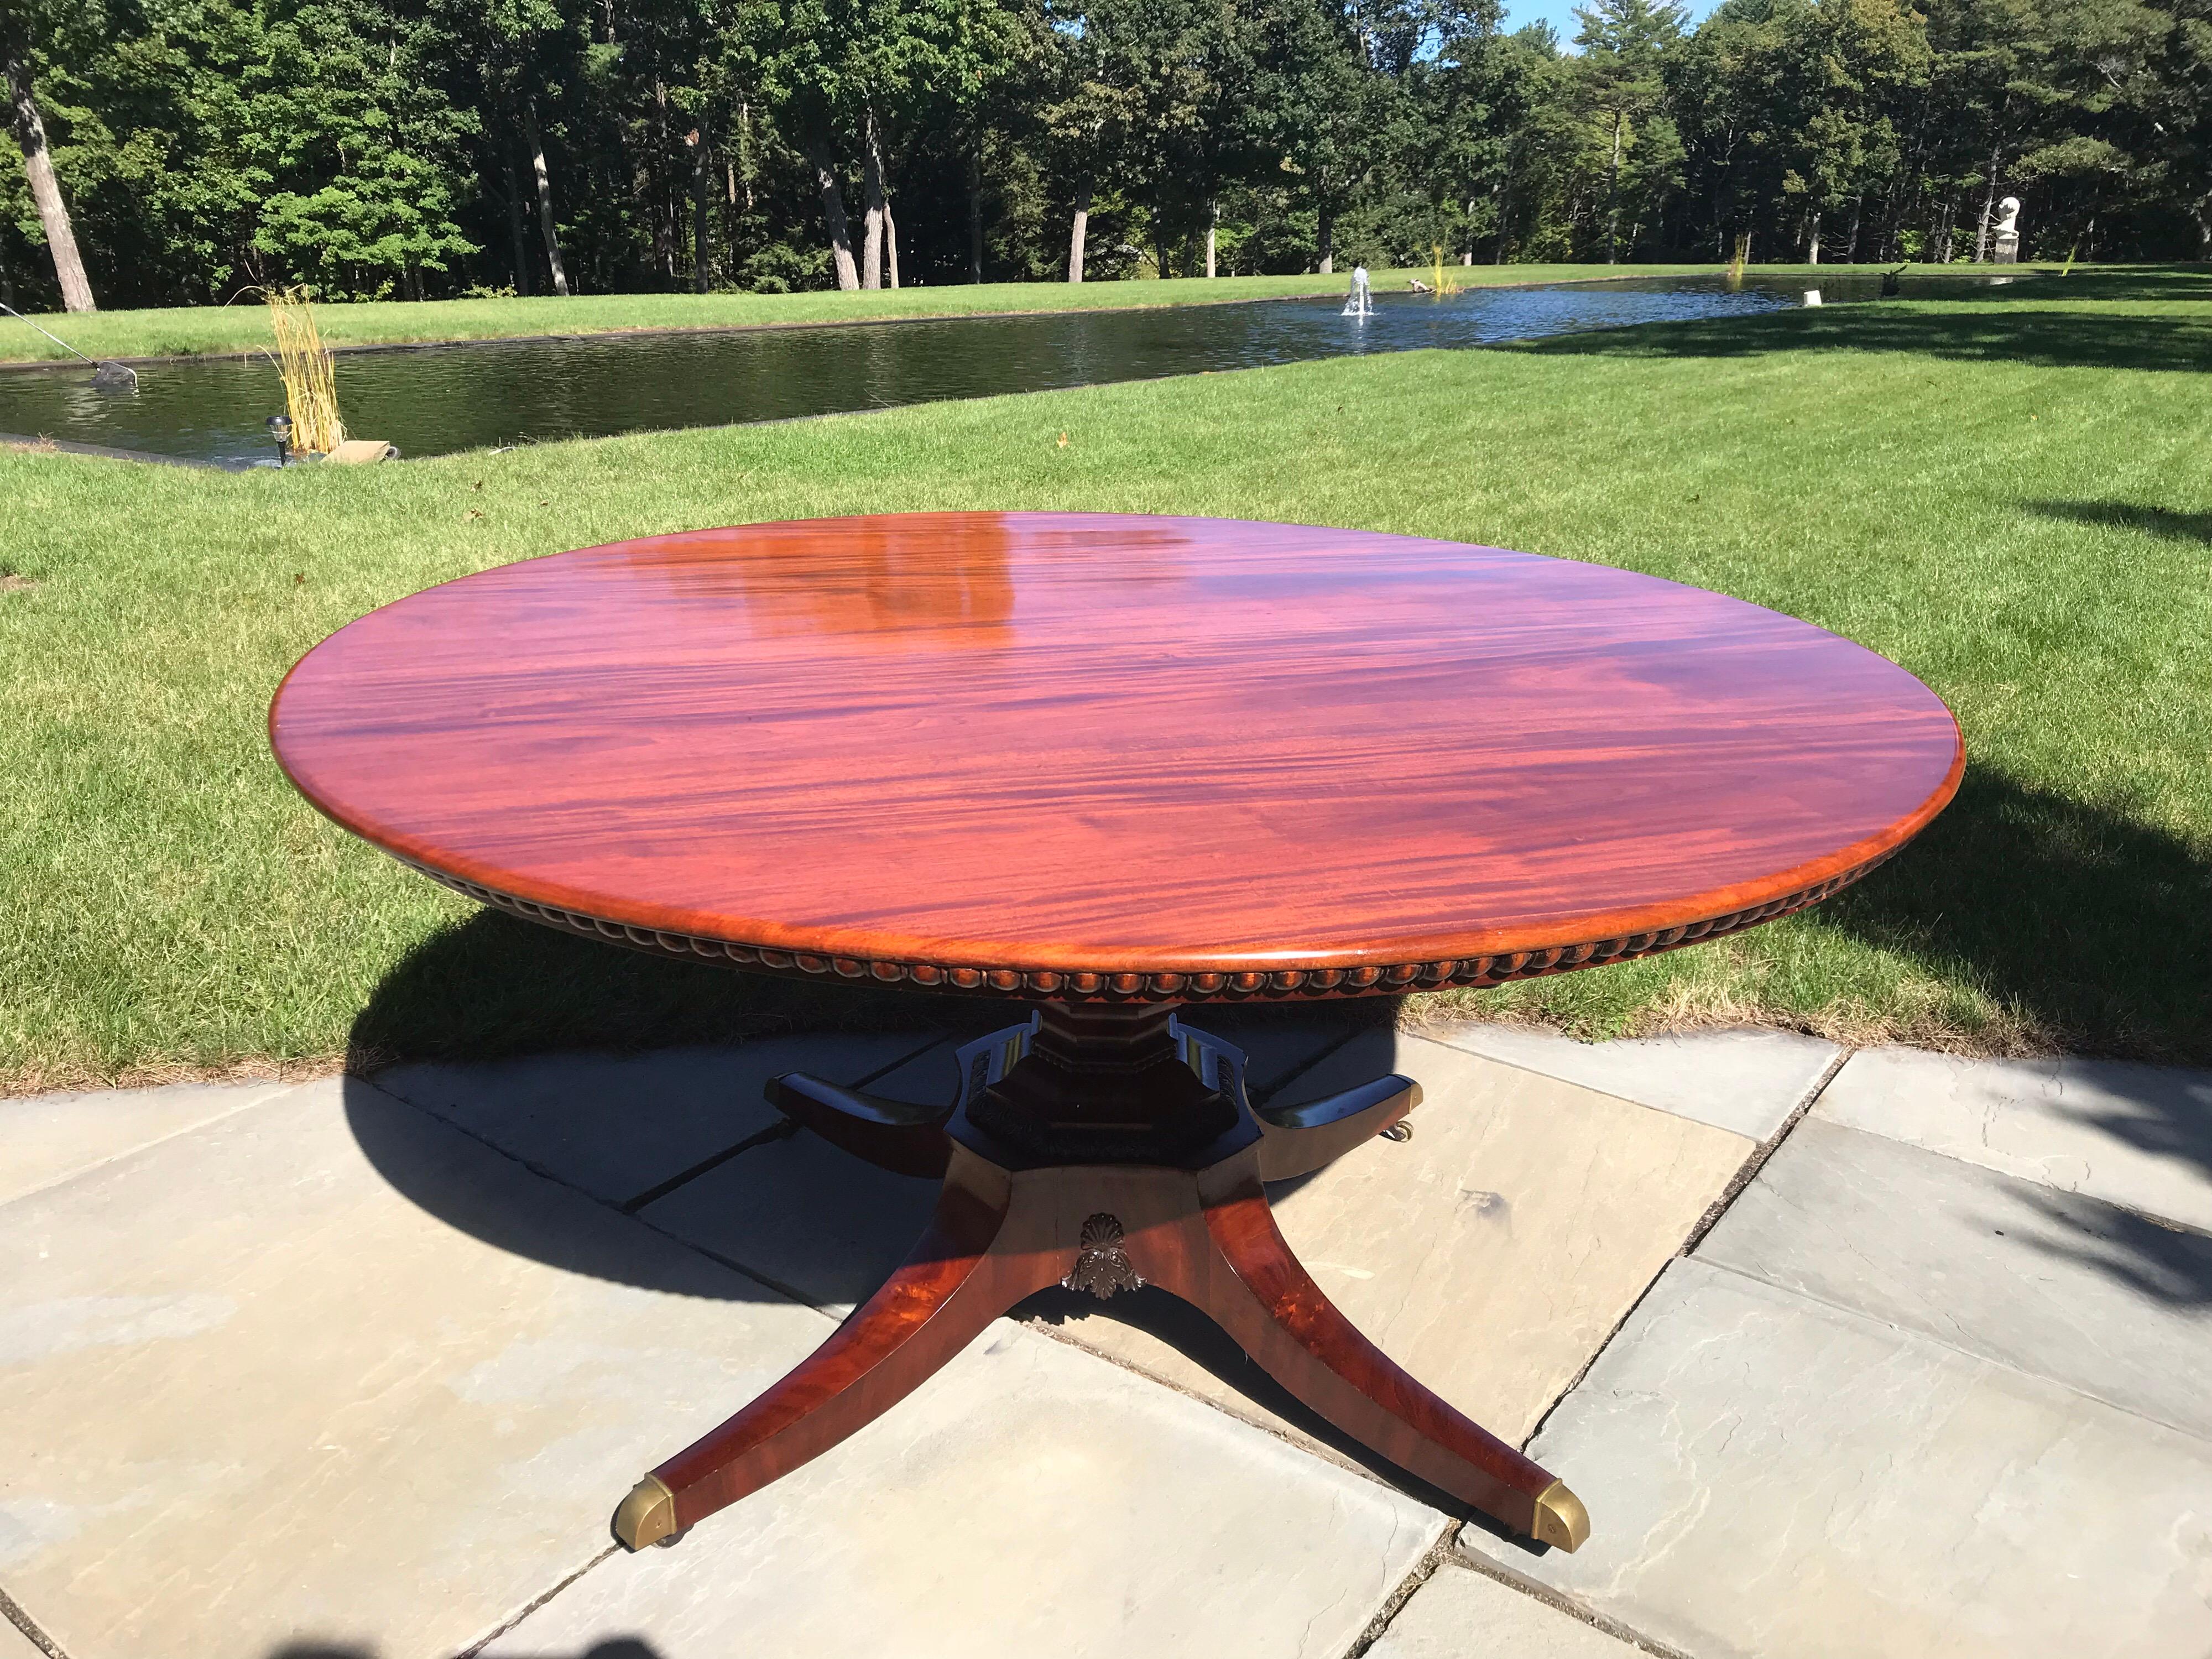 A most exquisite English Regency period mahogany 5’ diameter dining table or center table. The four legged pedestal has its original brass castor feet. The central shaft has finely carved neoclassical motifs. The solid mahogany top has a French